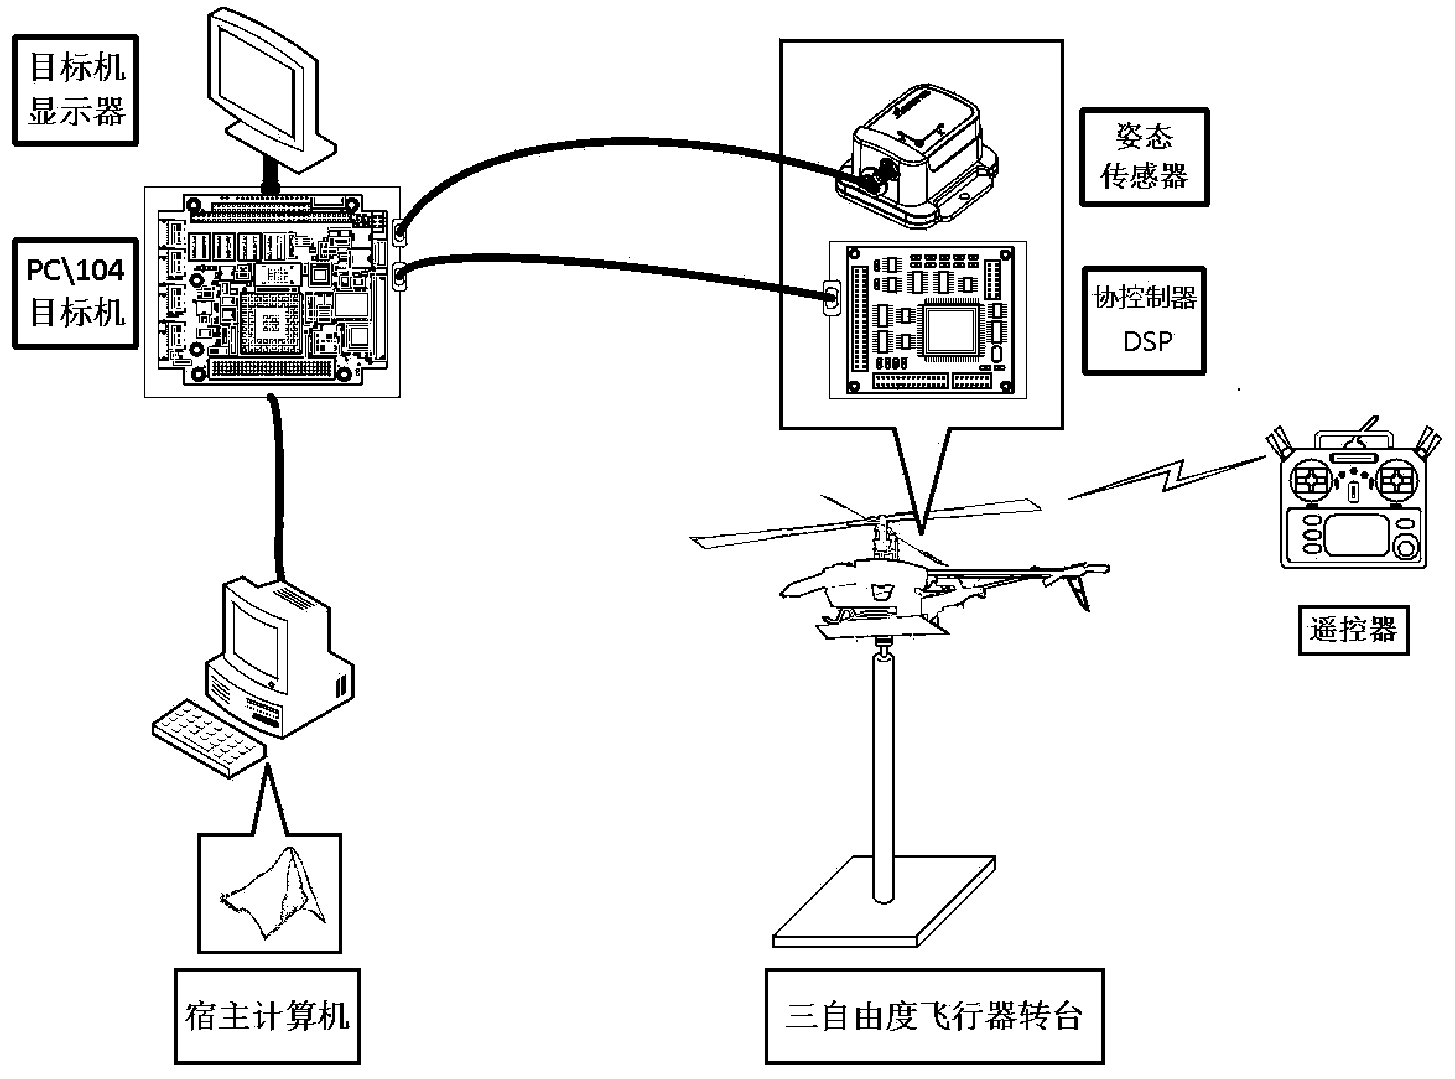 Nonlinear robust control method of posture of single-rotor unmanned helicopter based on fuzzy feedforward